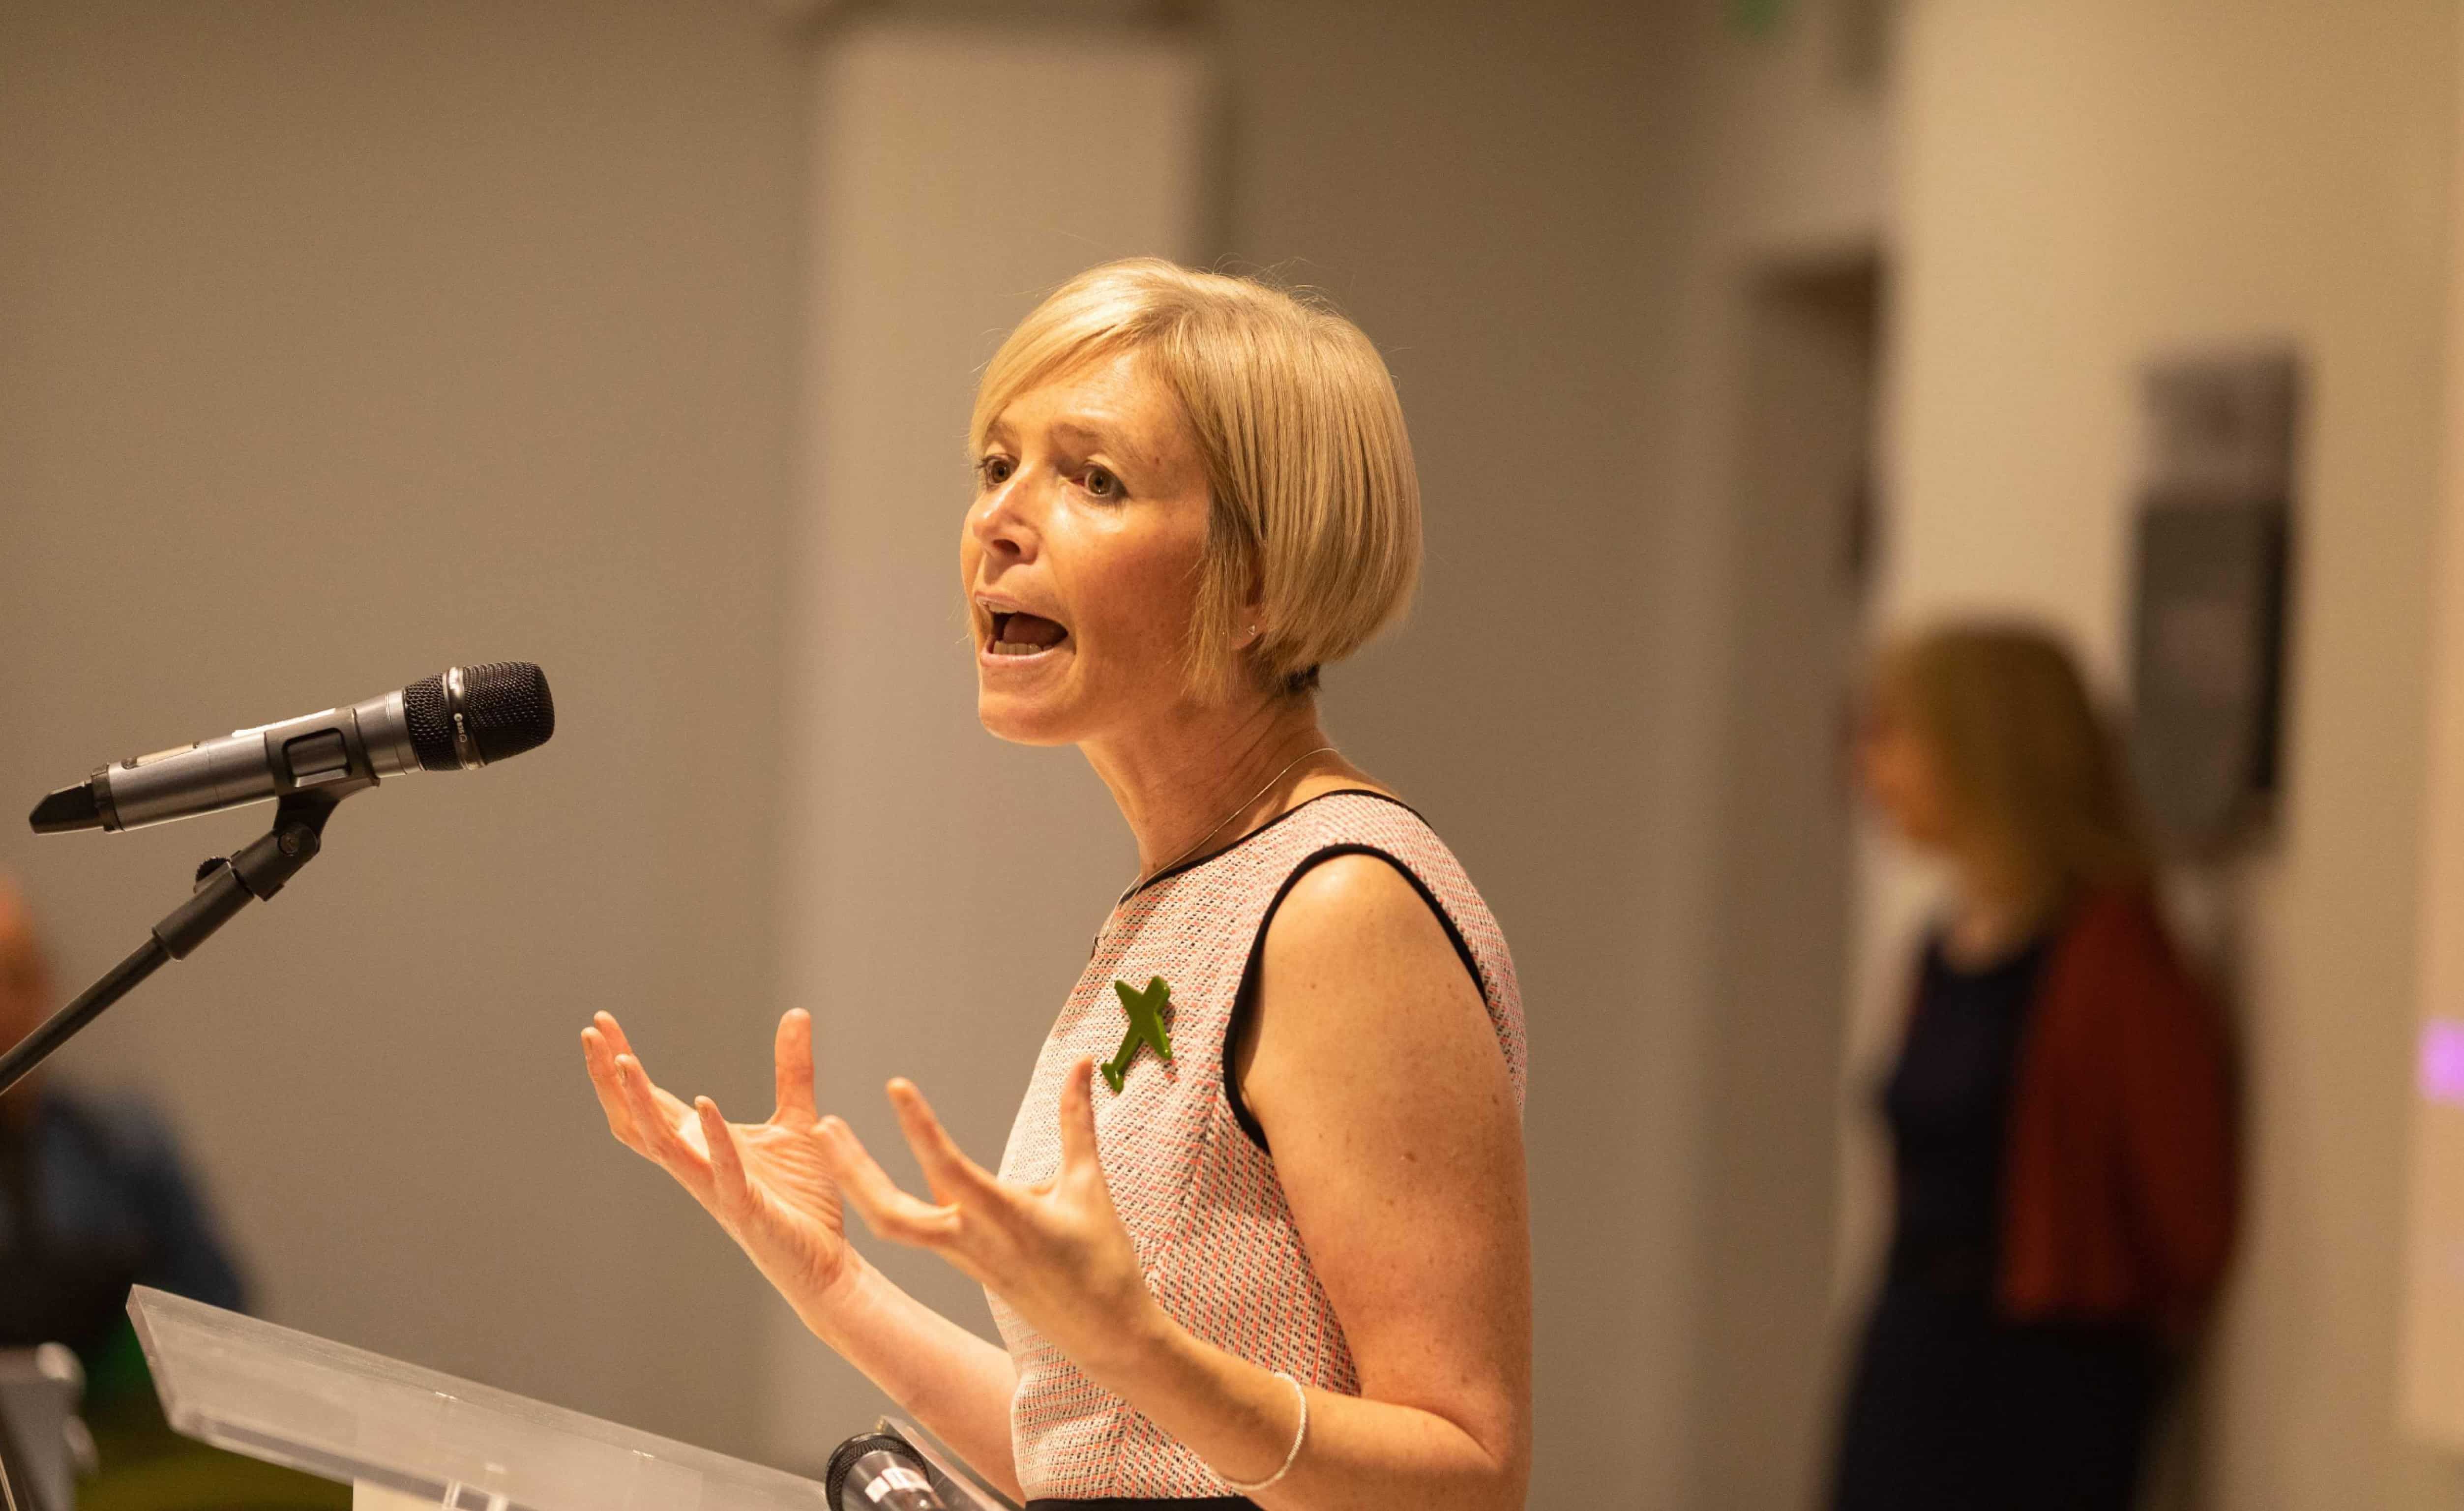 Professor Jo Crotty speaking at a public event